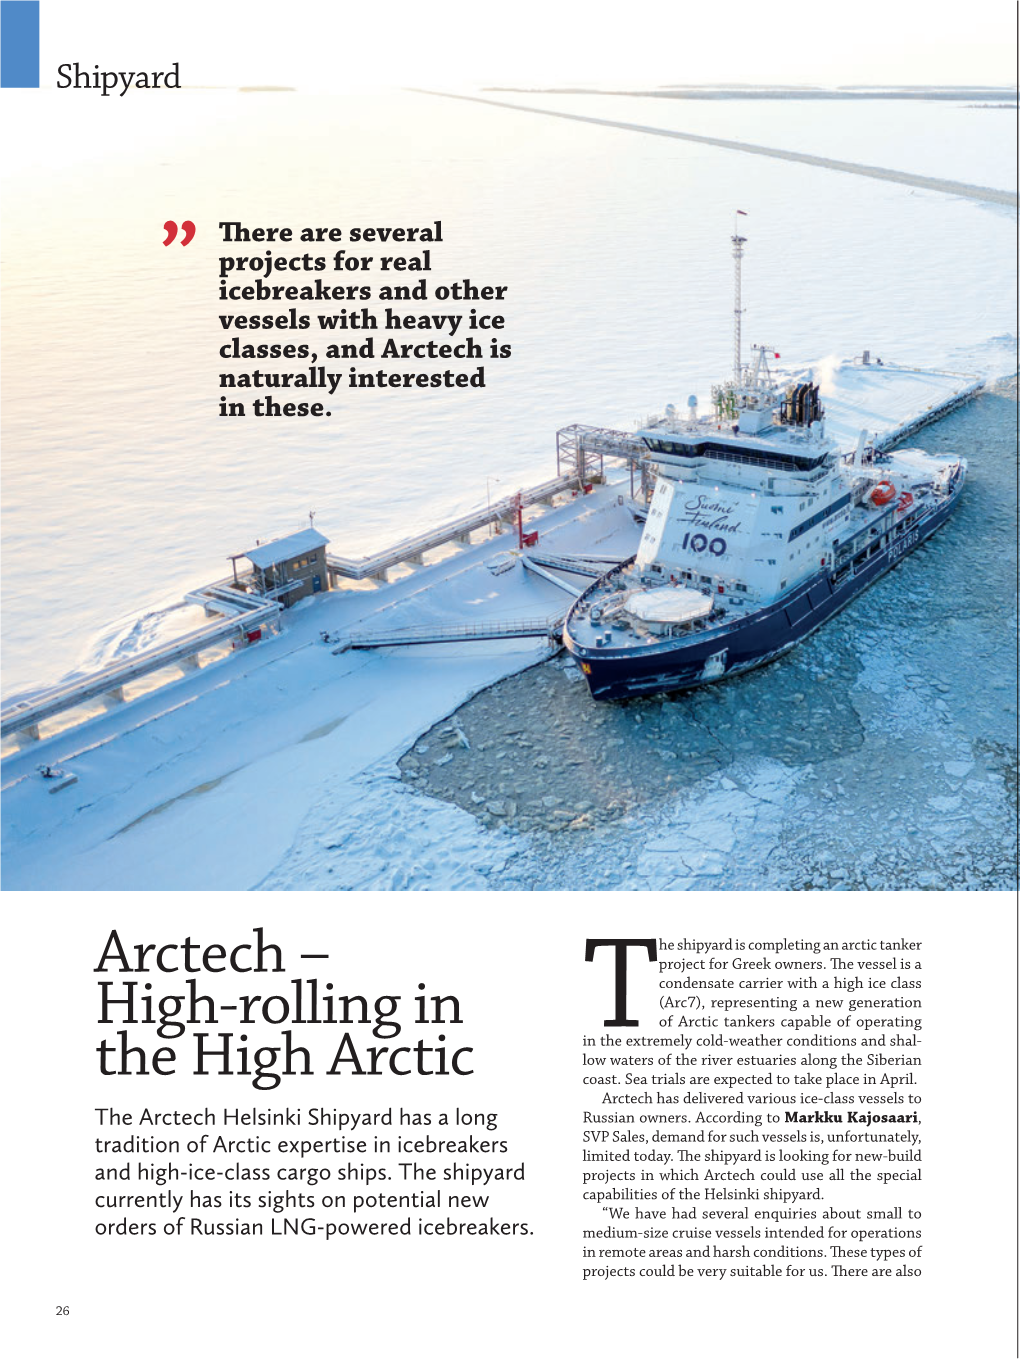 Arctech – High-Rolling in the High Arctic